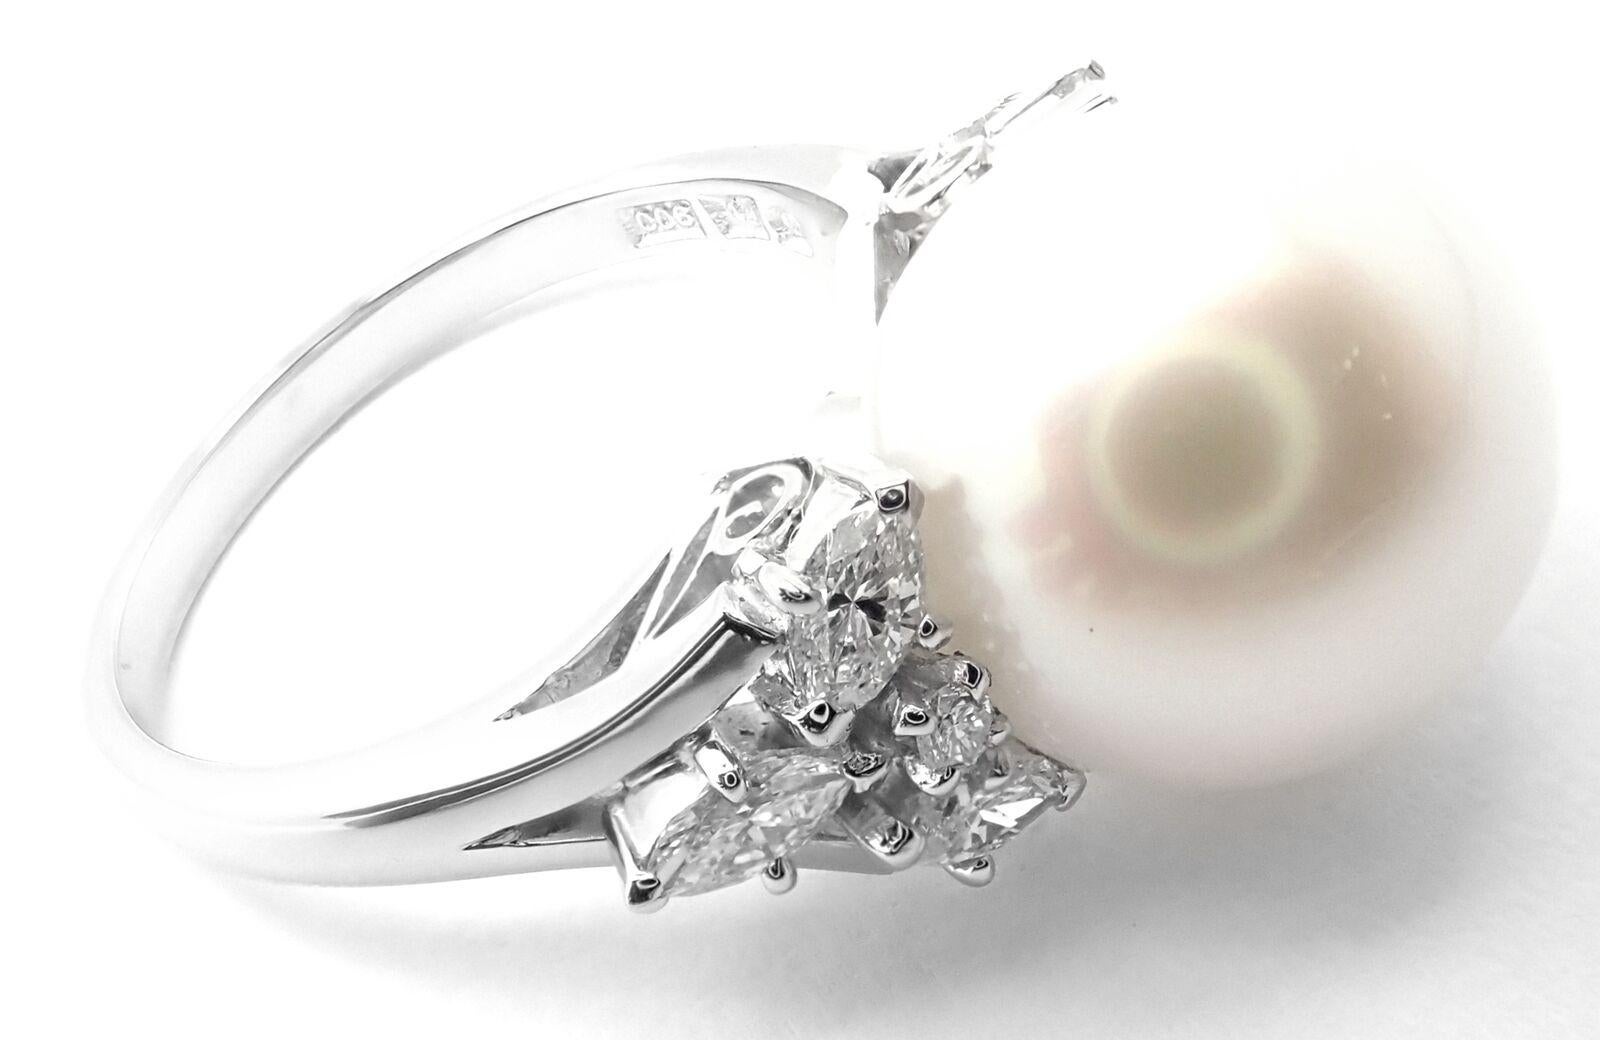 Platinum Diamond Large 12mm South Sea Pearl Ring by Mikimoto. 
With 8 round and marque shape brilliant cut diamonds VS1 clarity, E color diamonds total weight approx. 0.65ct
1 x 12mm South Sea Pearl 
Quality Grade A+
Details: 
Ring Size: 5.5
Weight: